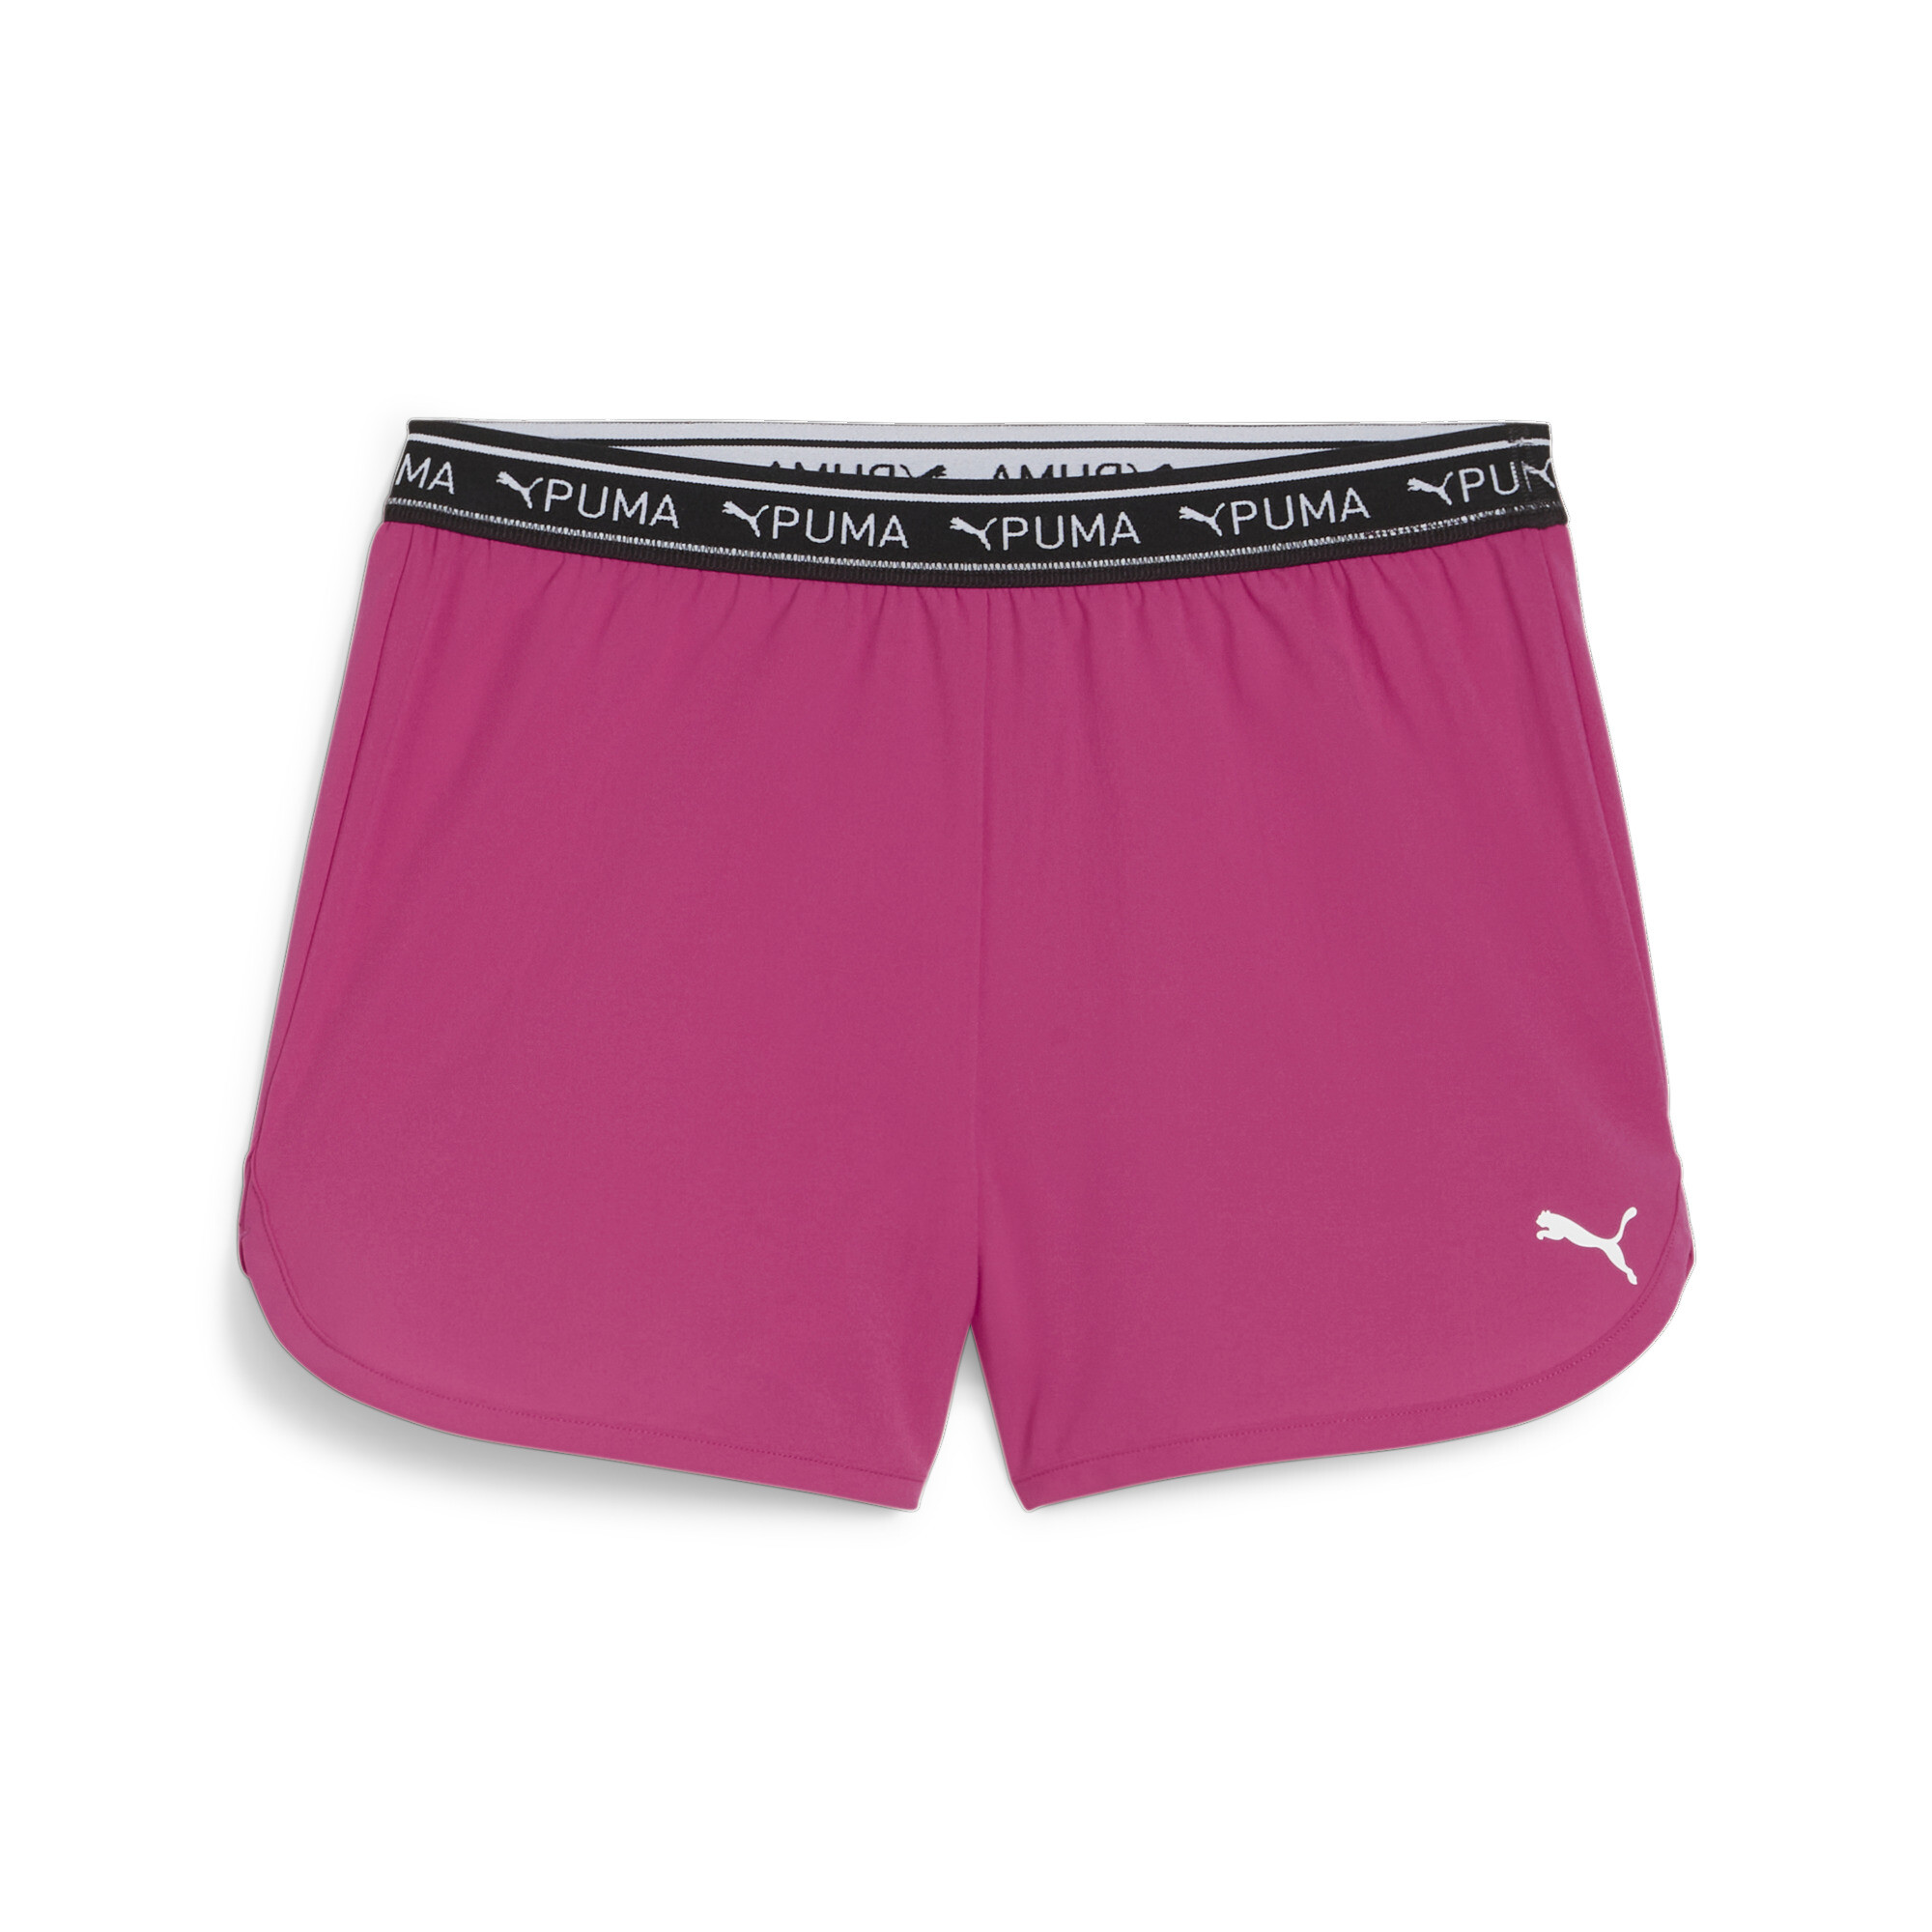 Puma STRONG Youth Woven Shorts, Pink, Size 13-14Y, Kids